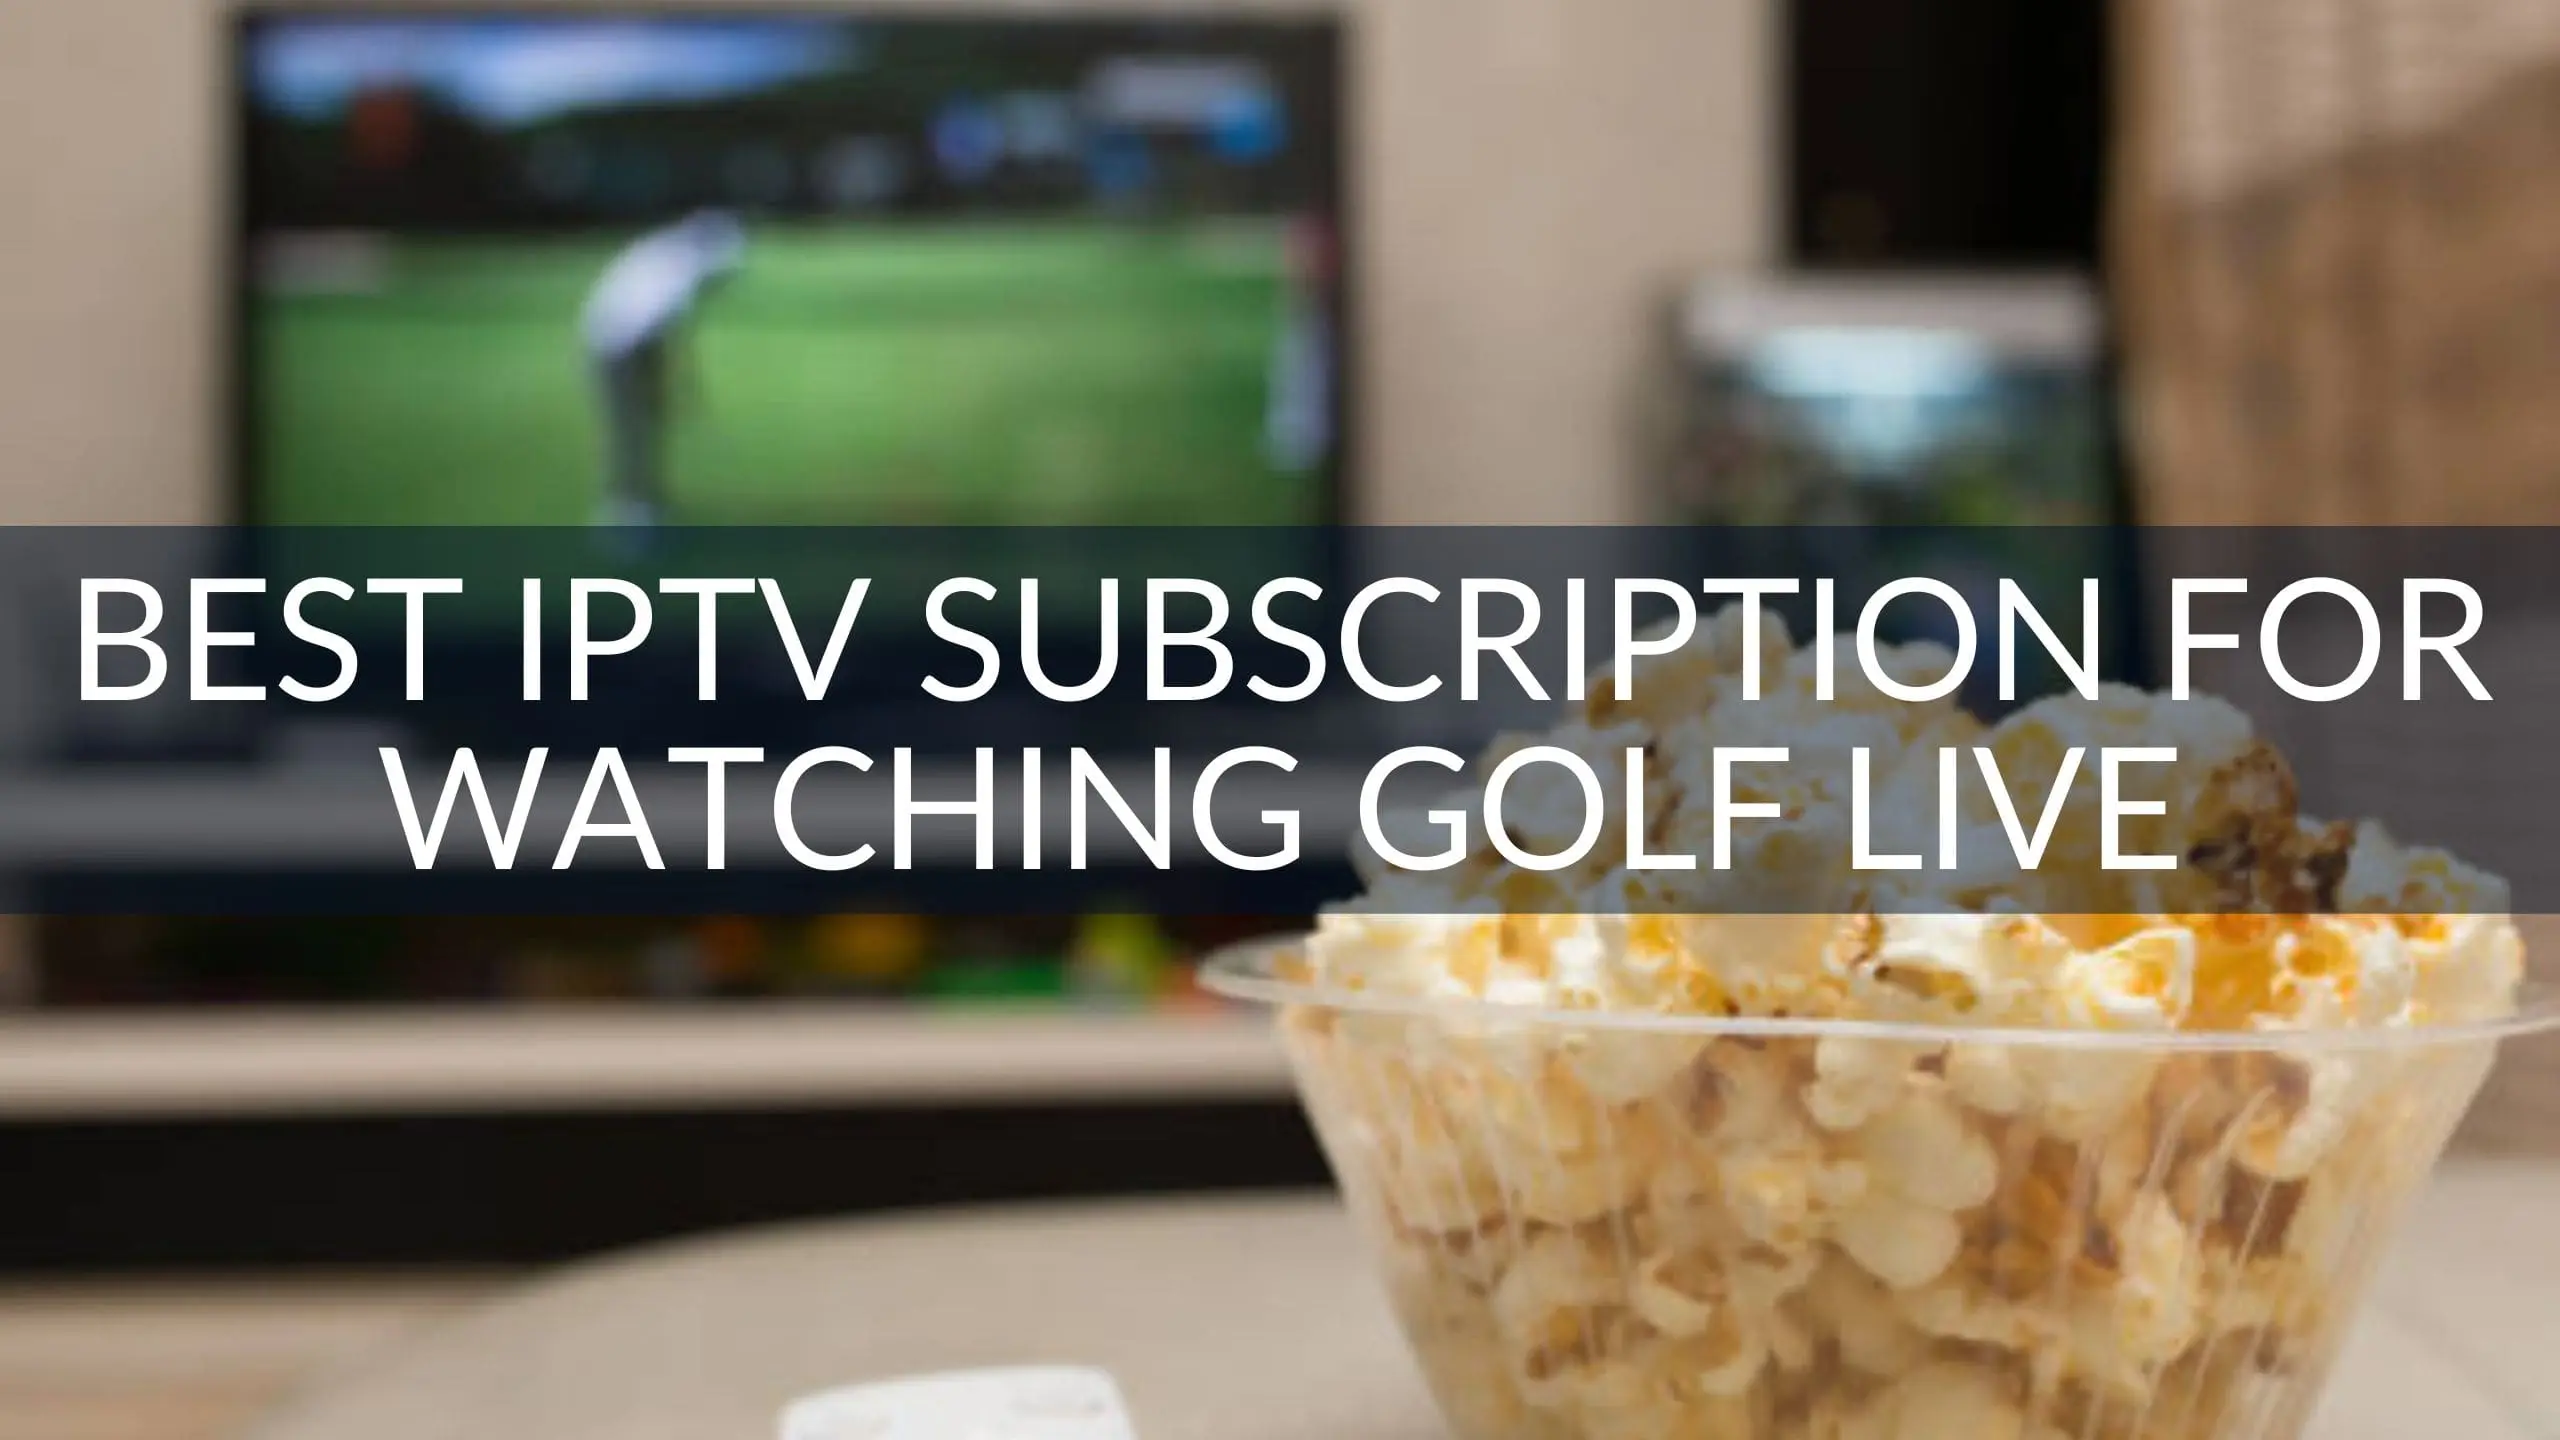 Best IPTV Subscription for Watching Golf Live